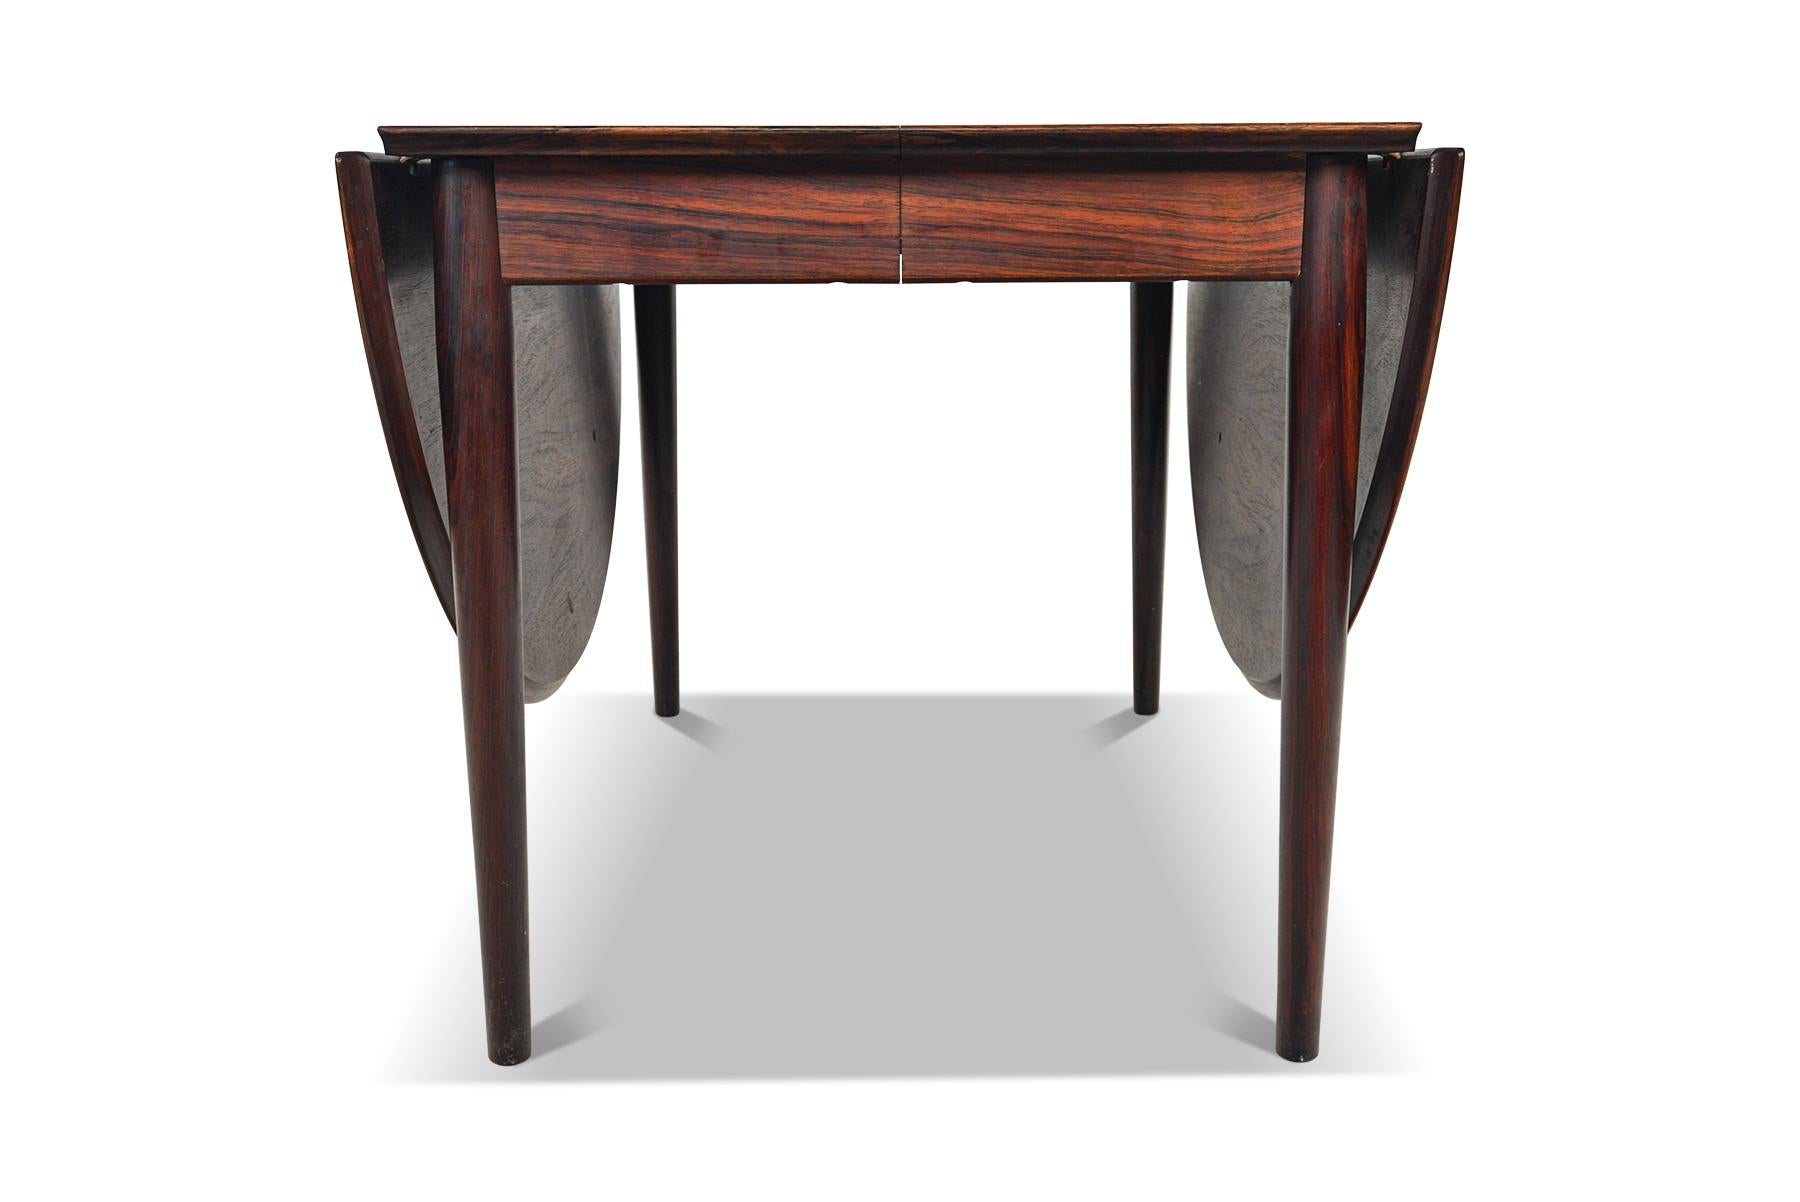 This stunning Danish modern dining table was designed by Arne Vodder in the 1950s. This table features two drop leaves on the exterior and opens to hold two additional skirted leaves. This table can comfortably seat four to ten guests. In excellent